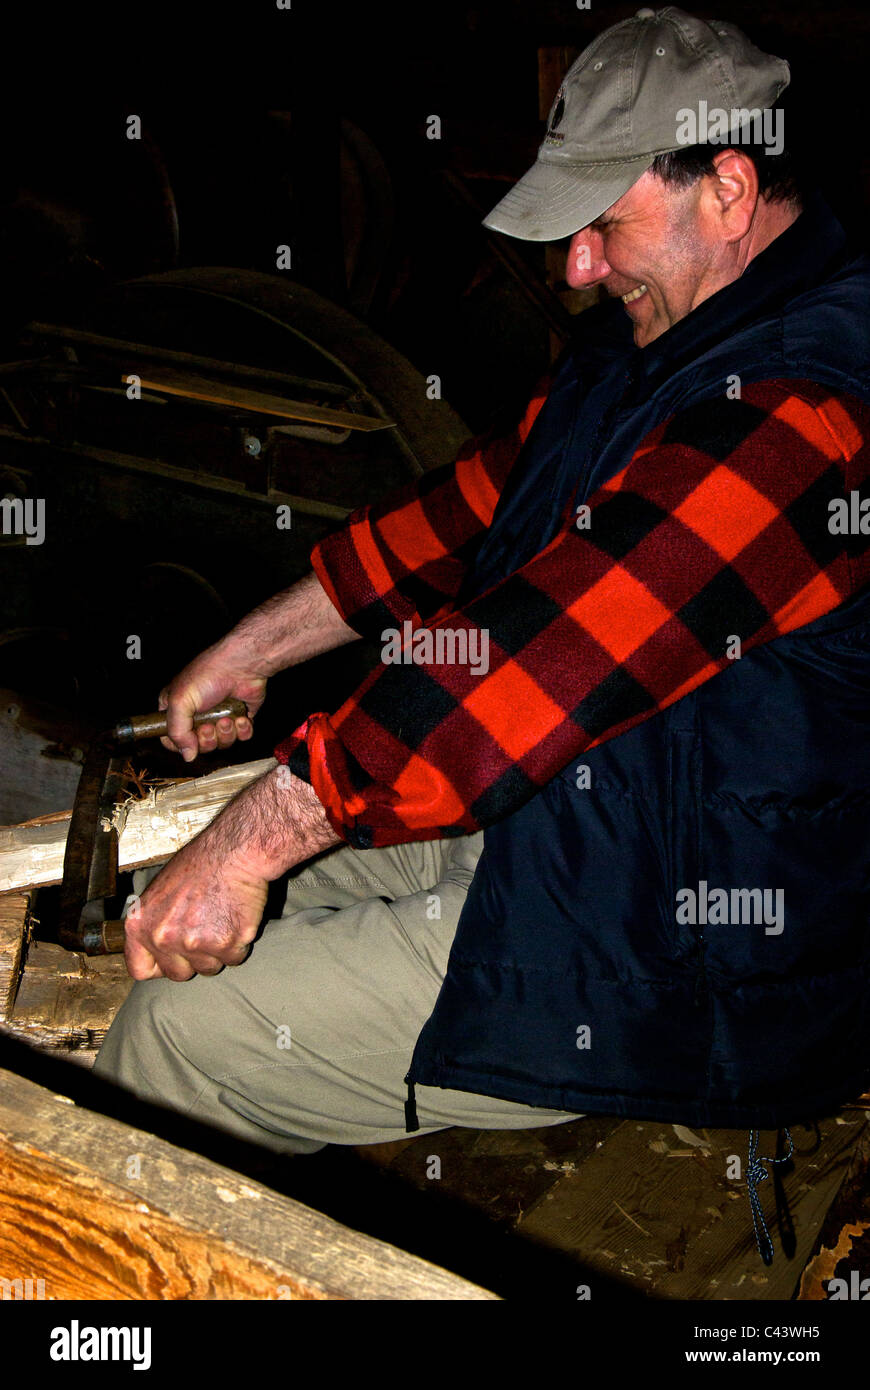 Tour guide Forestry Museum Grandes Piles Quebec using antique spoke shave to hand shape wooden shingles Stock Photo